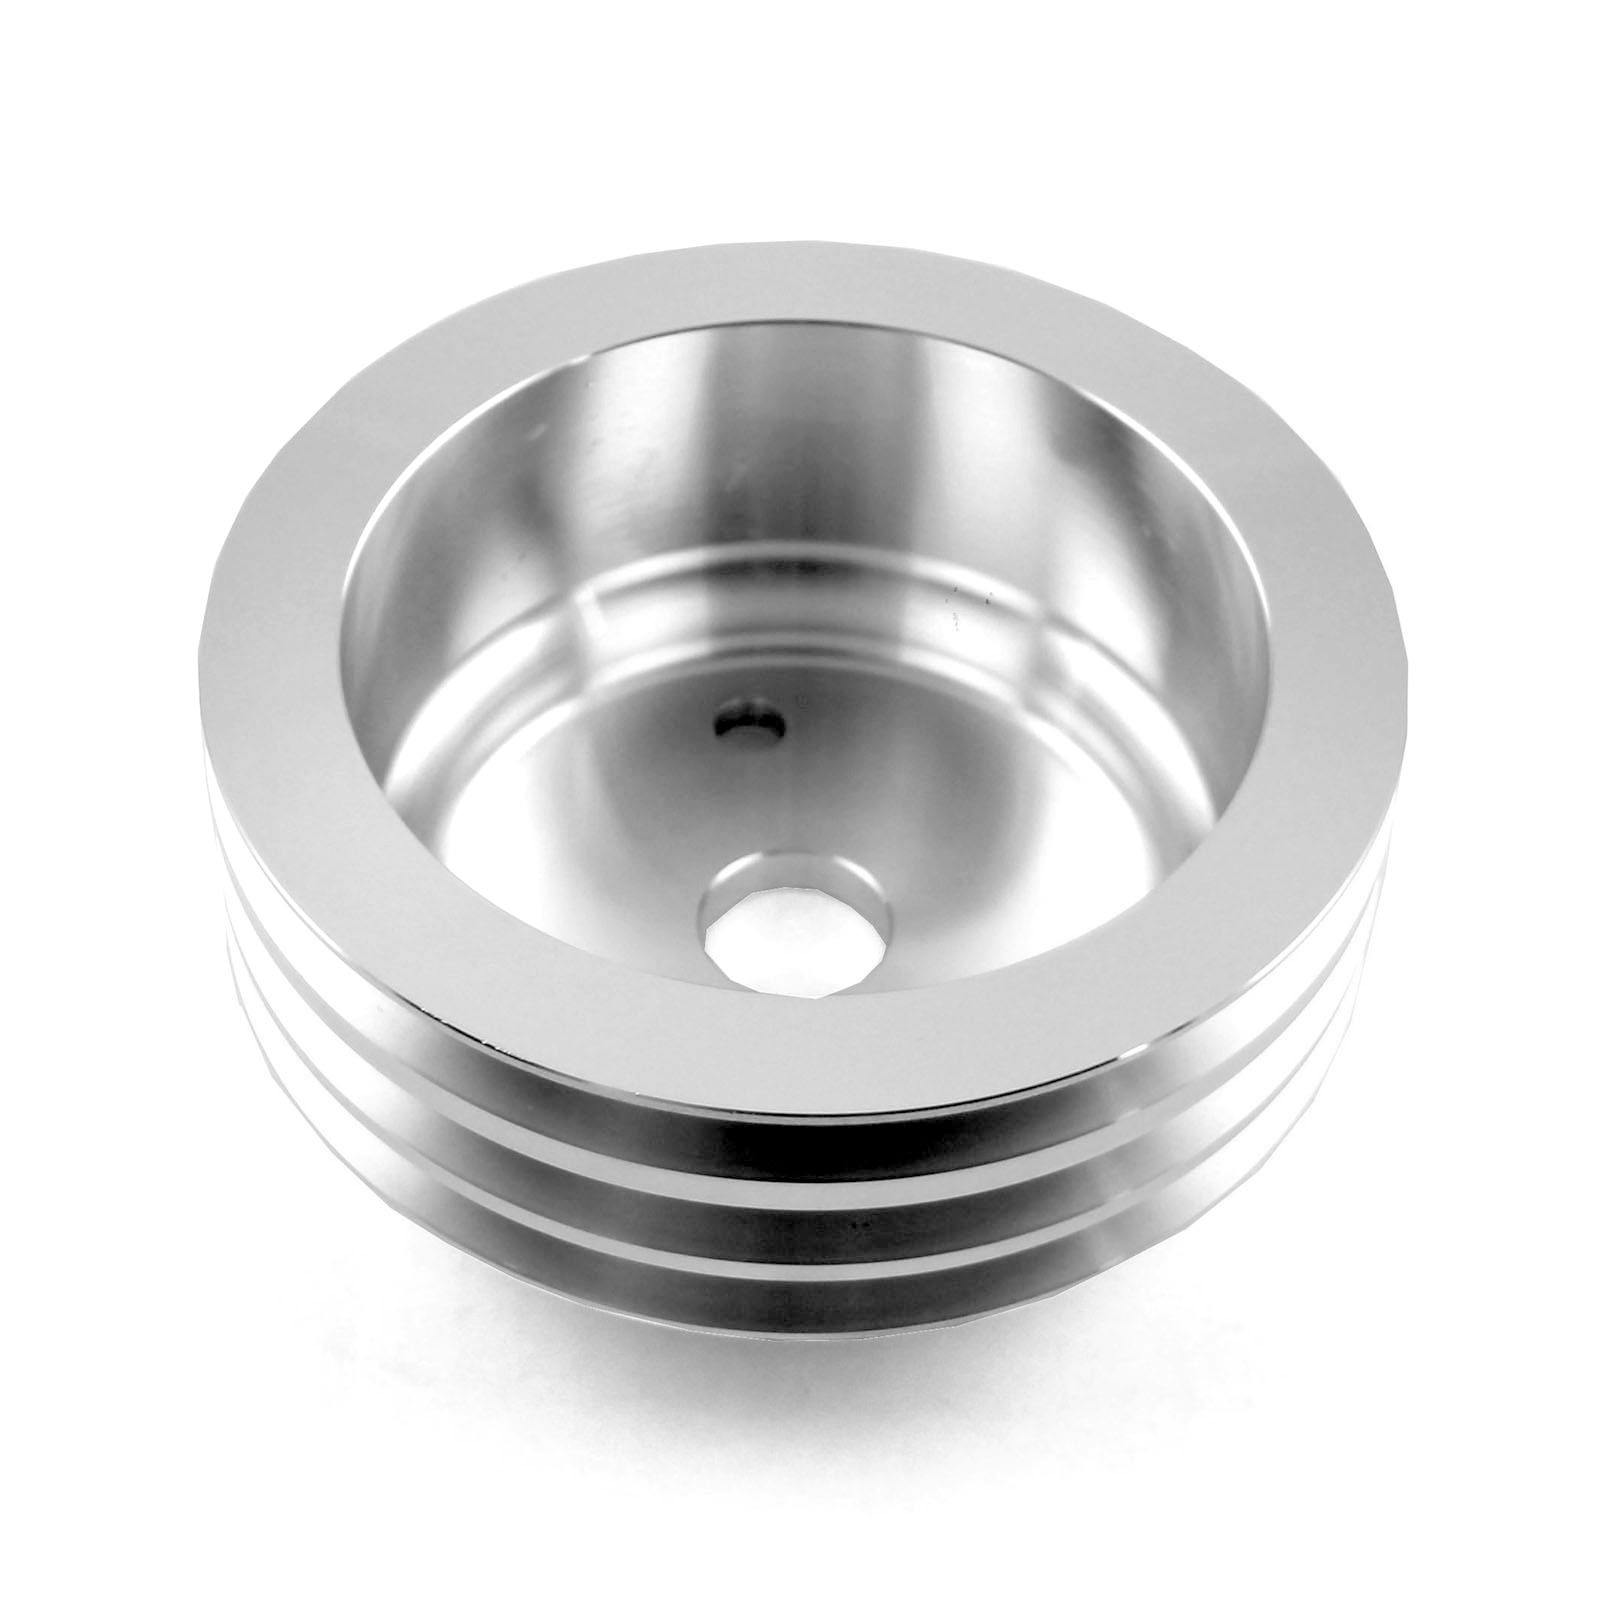 PCE by Speedmaster PCE239.1008 Fits Chevy SBC 350 Billet Aluminum Short Water Pump Swp 2 Groove Crank Pulley 